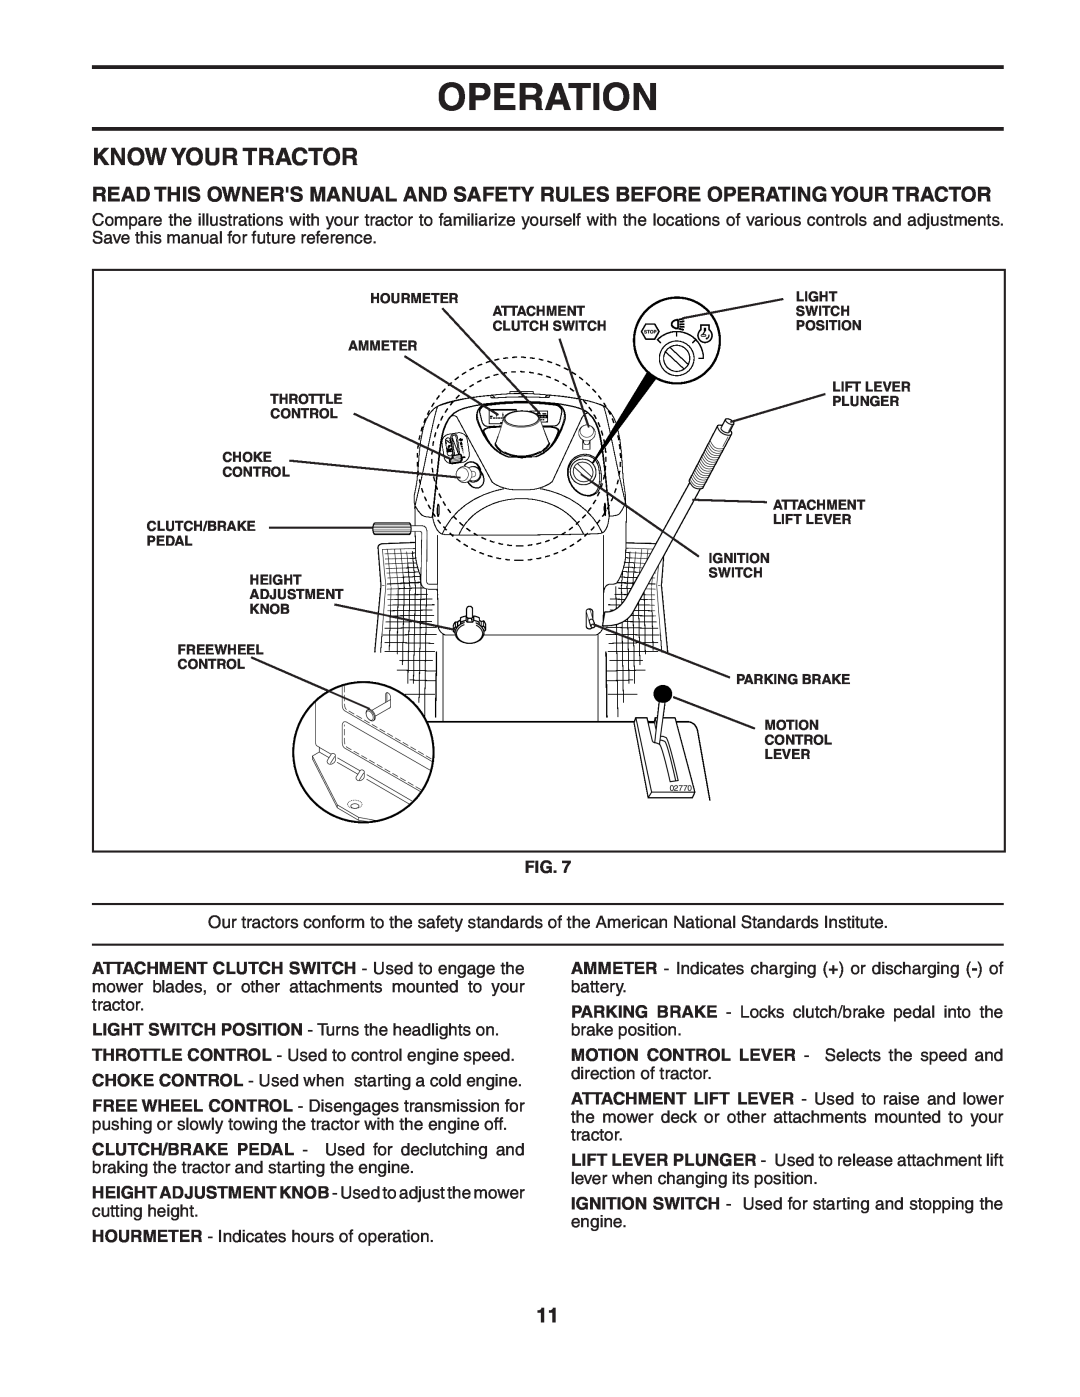 Husqvarna YTH2548 owner manual Know Your Tractor, Operation, LIGHT SWITCH POSITION - Turns the headlights on 